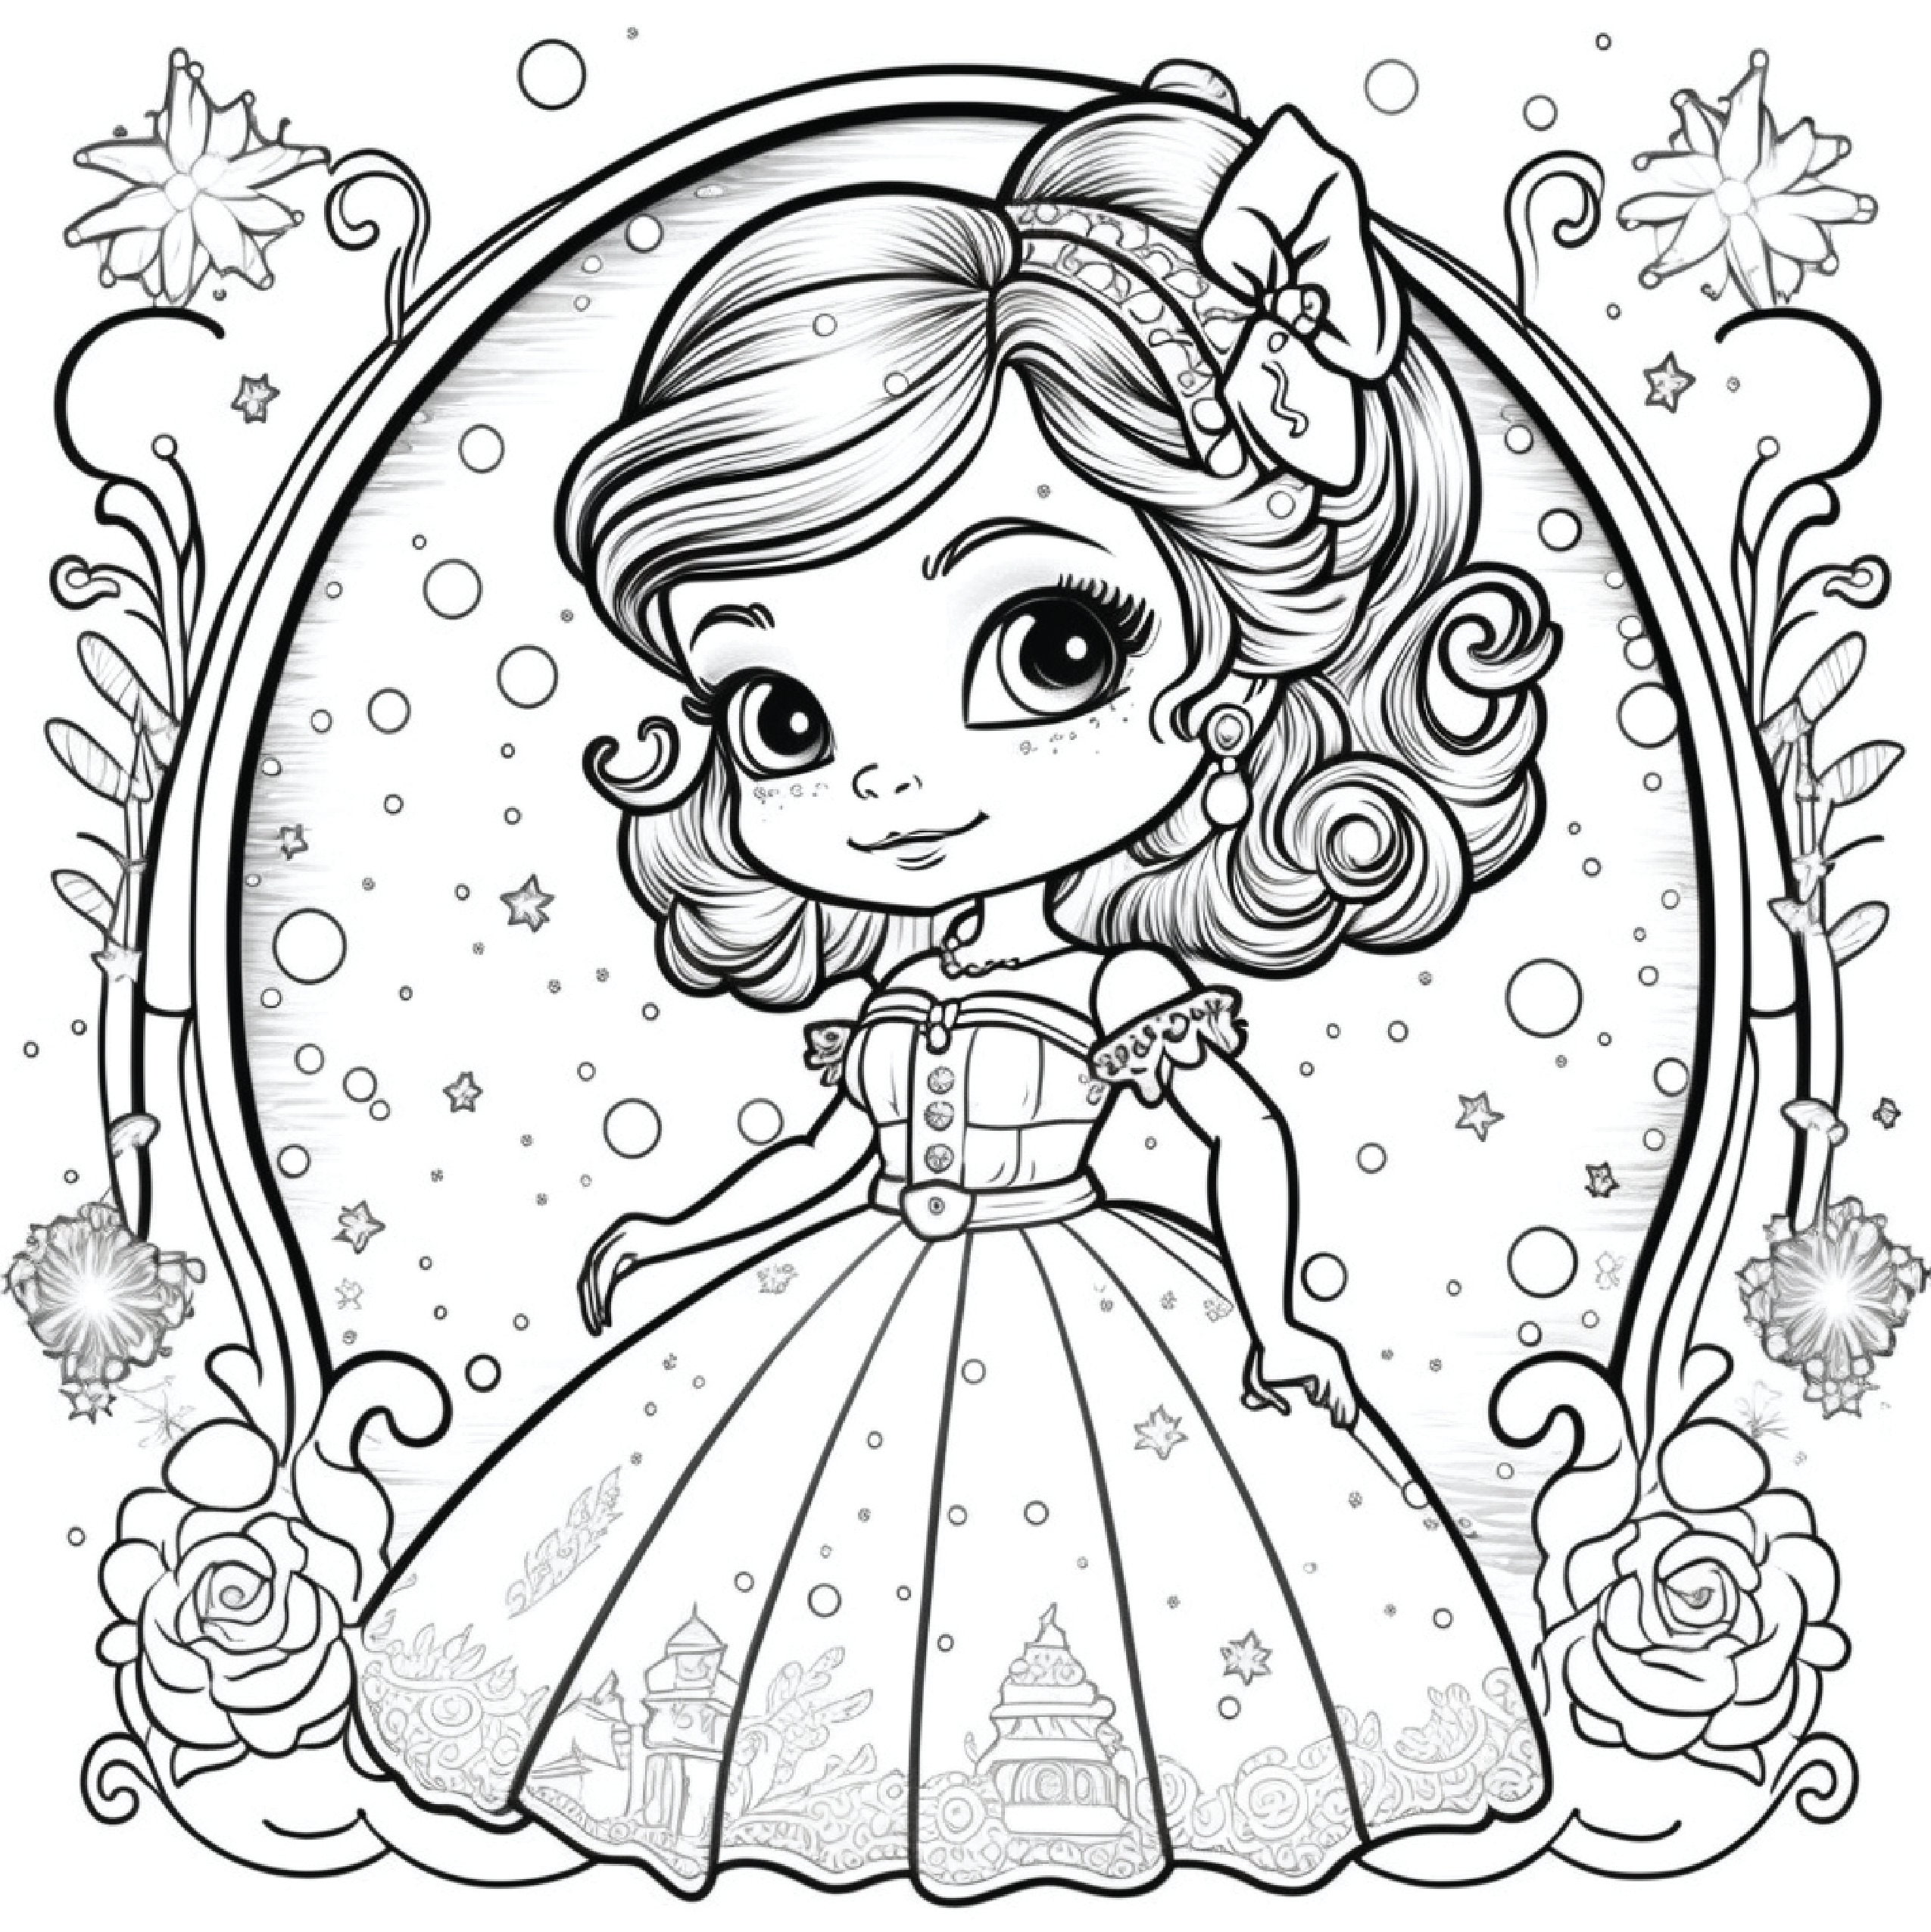 Princess Coloring Book for Kids Ages 4-8: Sweet Girls Coloring Books :  Super Gift Princess Colouring Book for Girls, Kids, Toddlers: Ages 2-4 , Age   Birthday Gift Ideas and Christmas Gift